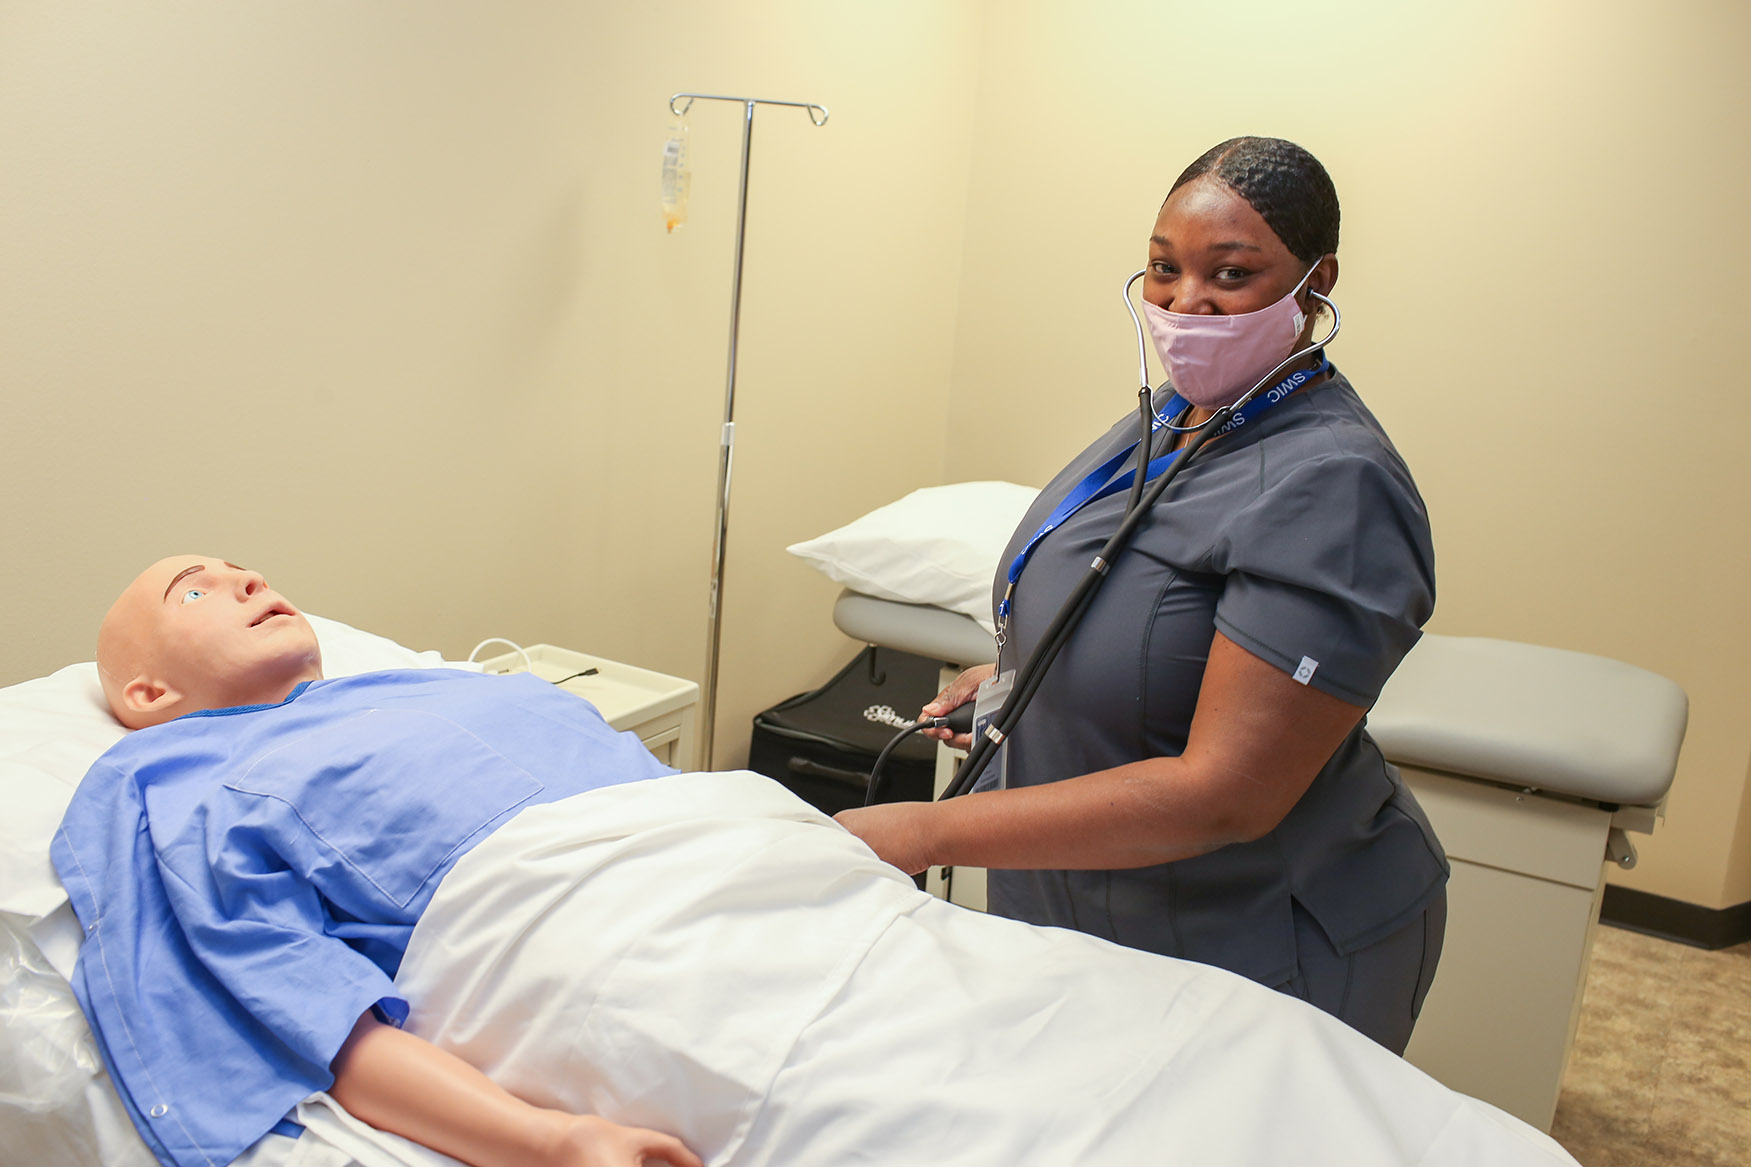 nursing student practices with medical dummy